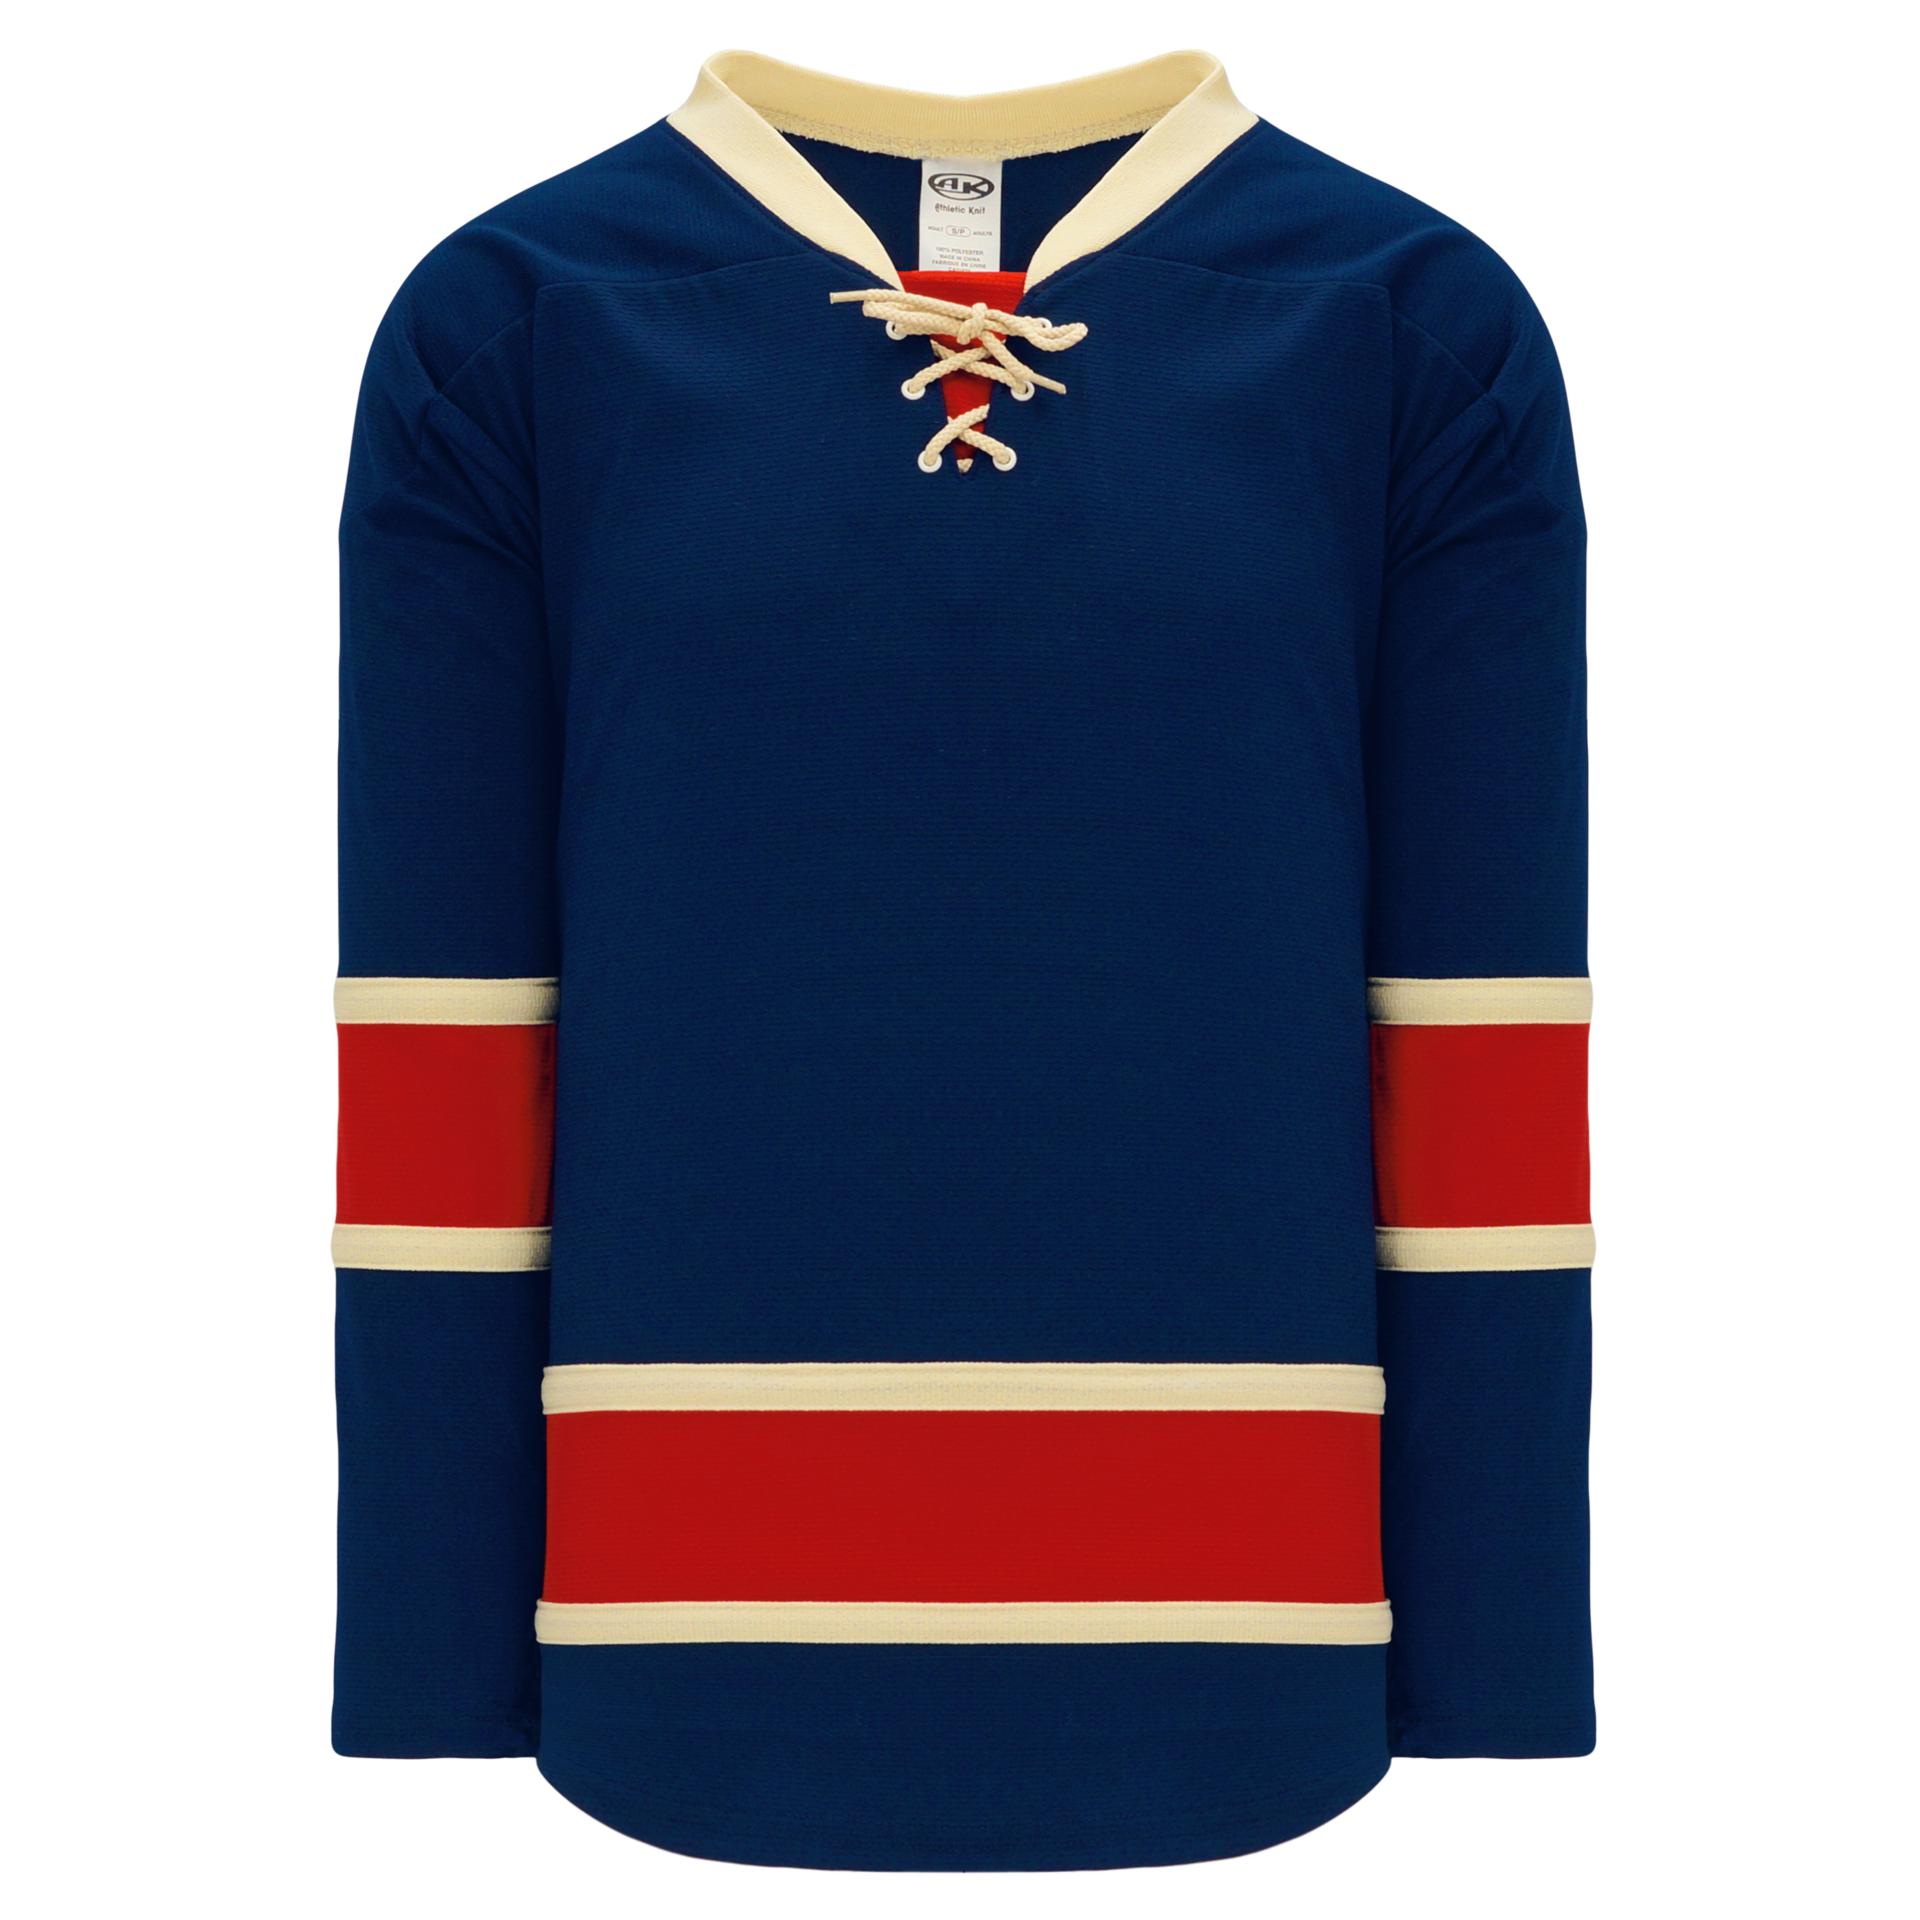 NHL New York Rangers '22-'23 Special Edition Royal Replica Blank Jersey